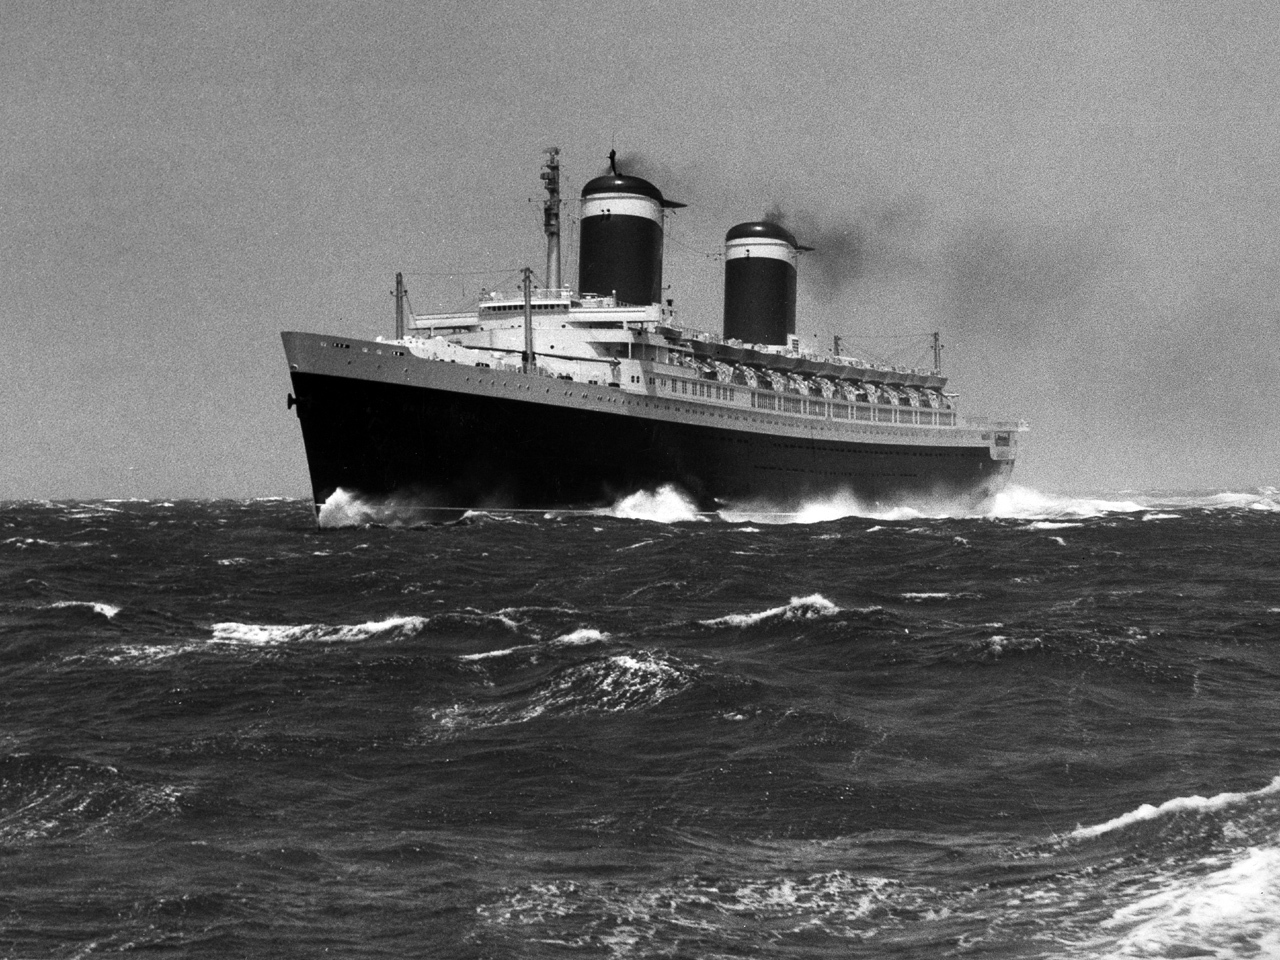 The SS United States - Photo 1 - Pictures - CBS News